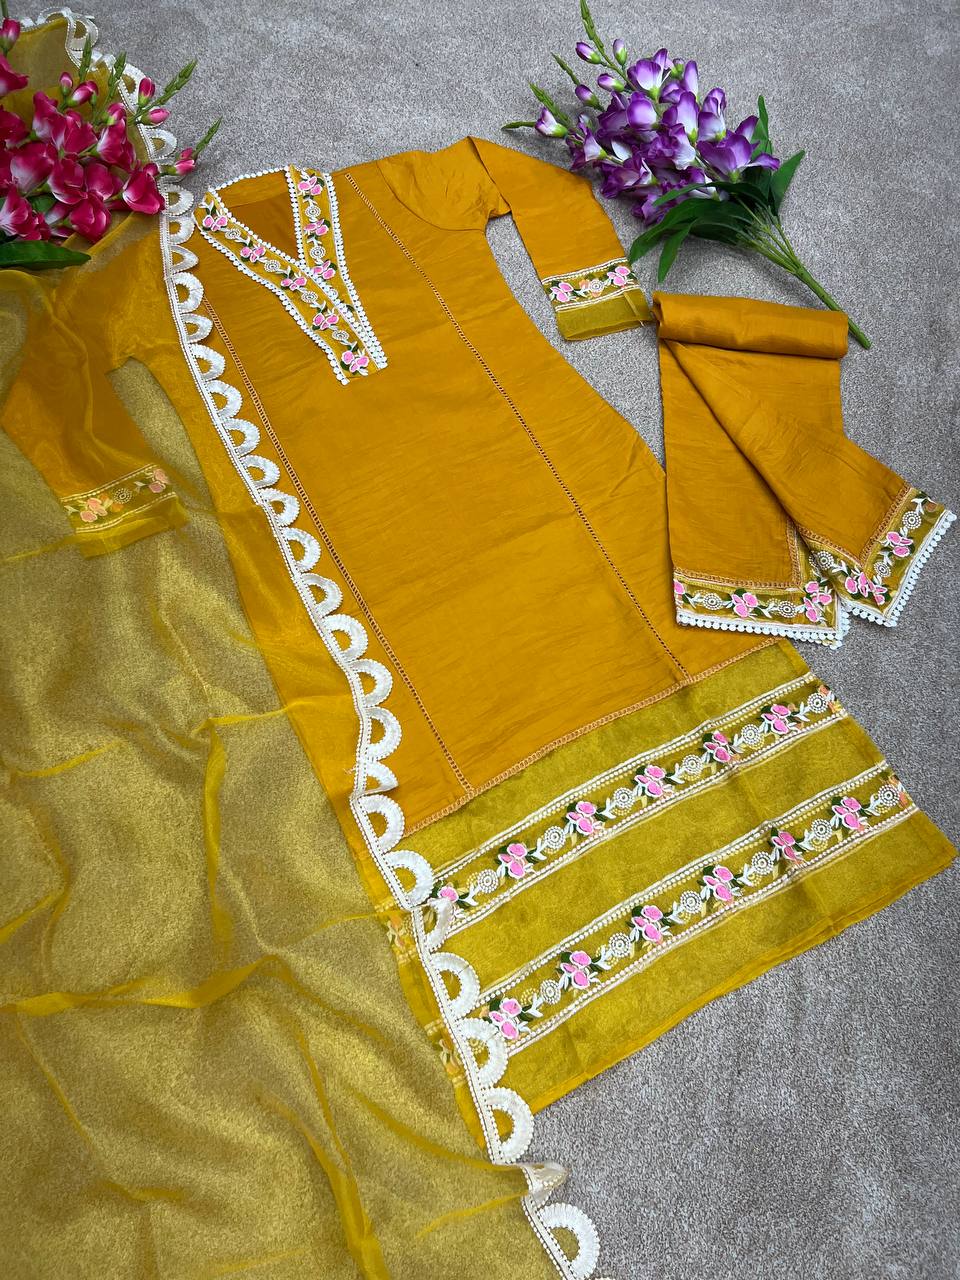 Mustard Yellow Salwar Suit In Soft Maska Cotton Silk With Embroidery Work